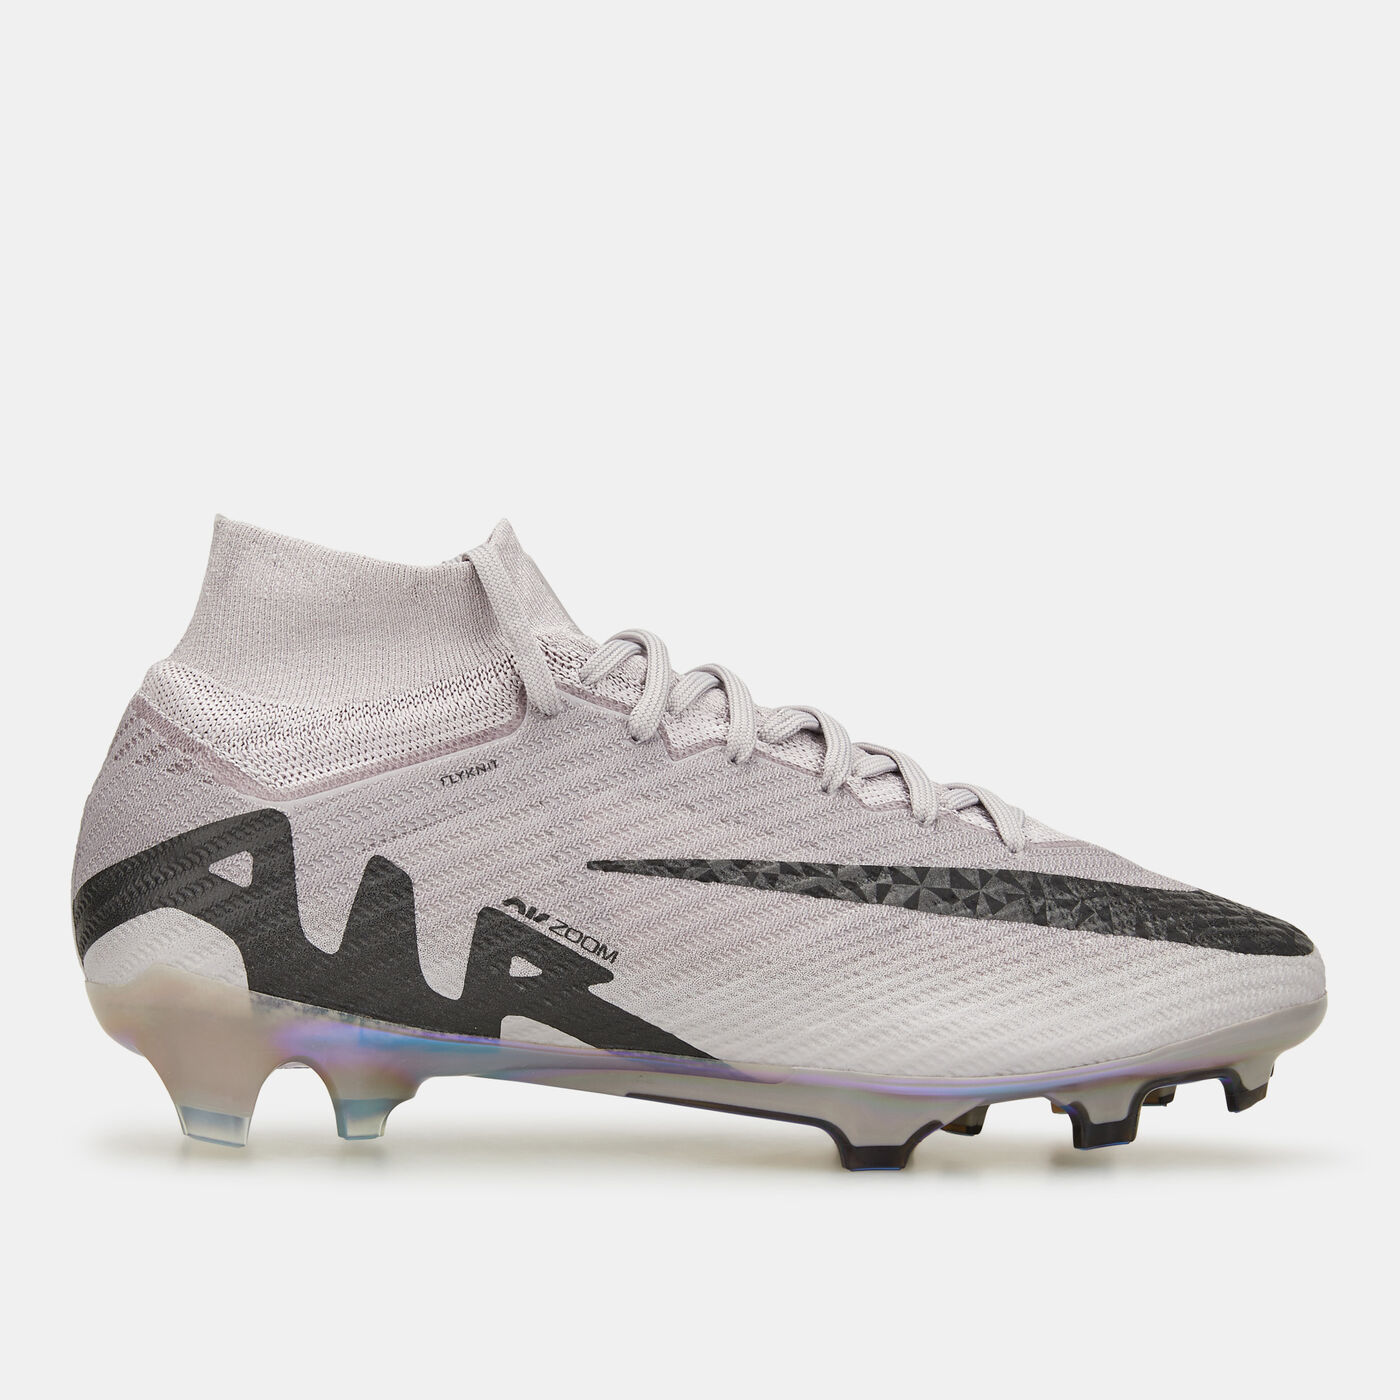 Men's Mercurial Superfly 9 Elite AS Firm Ground Football Shoes